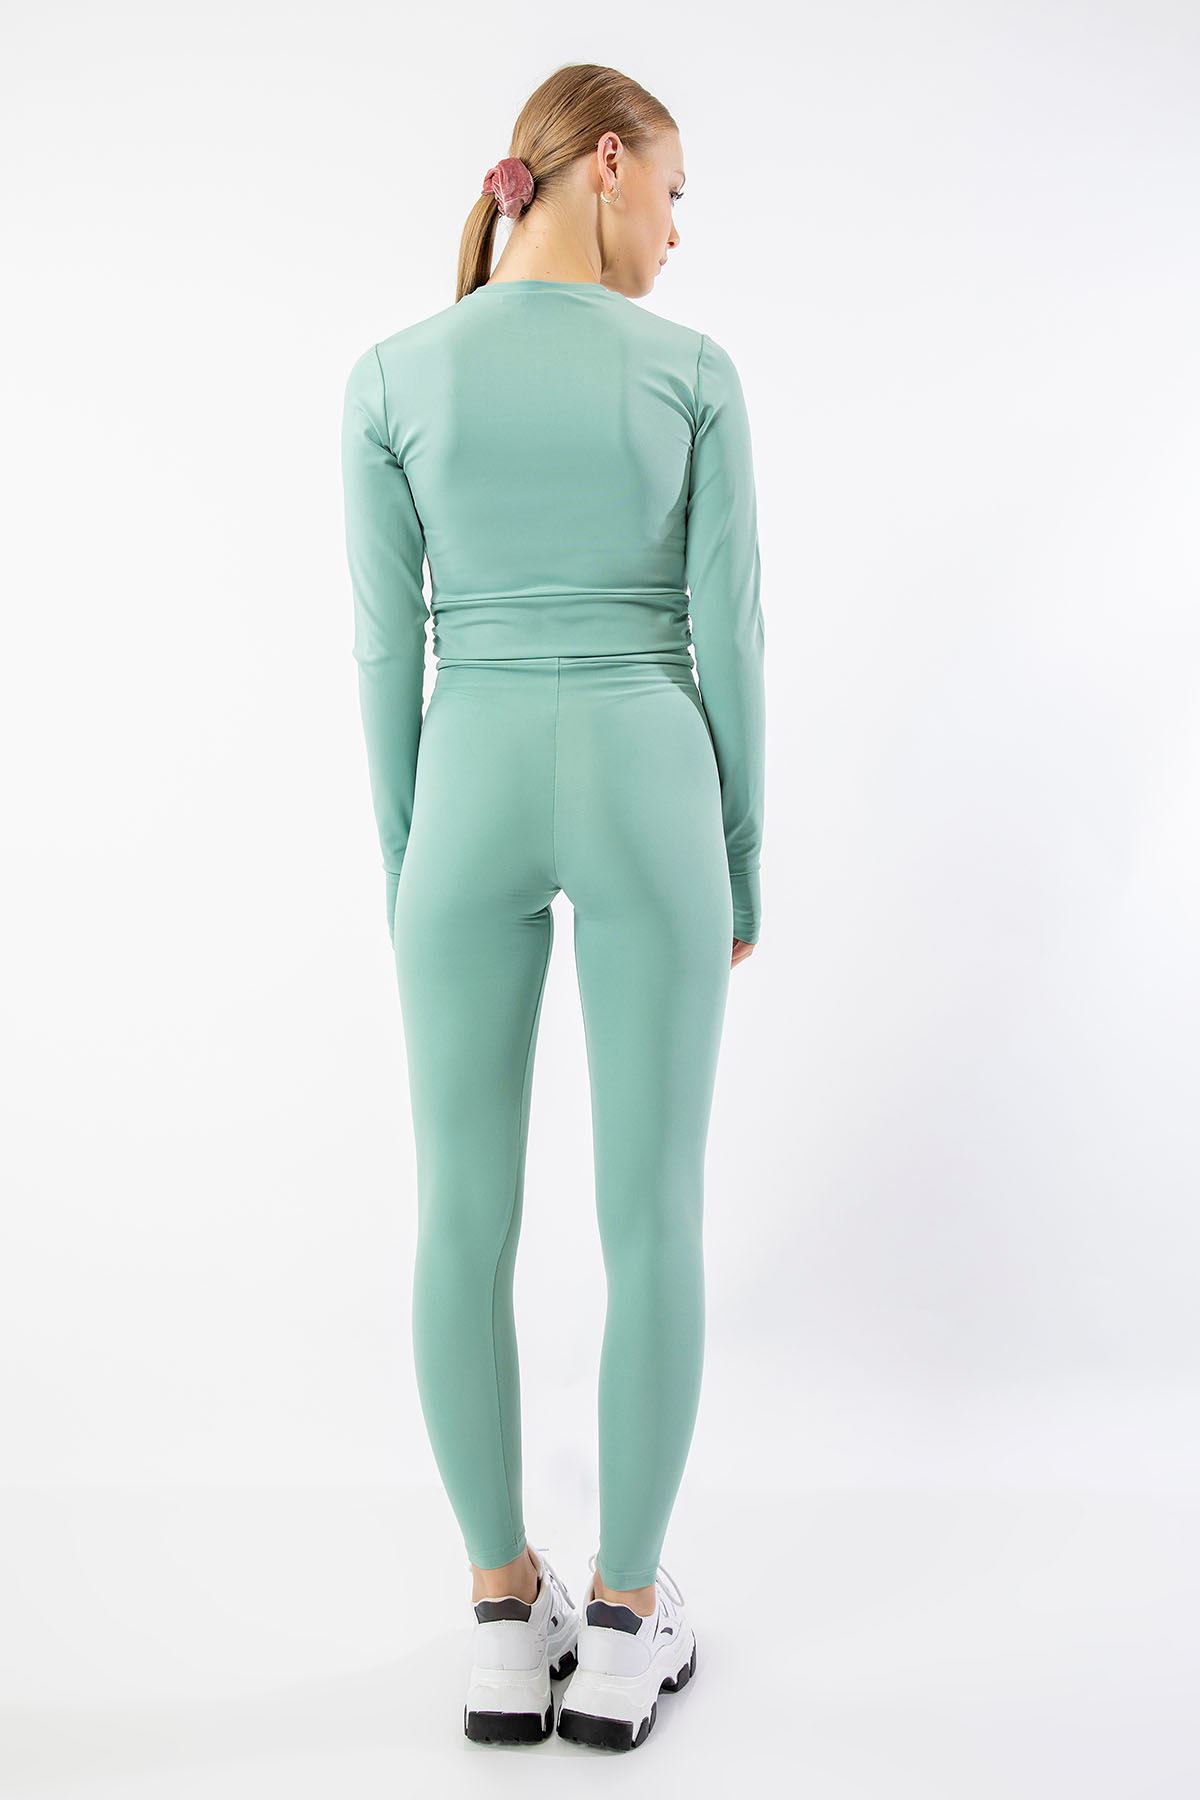 Scuba Fabric Long Shirred Women Tights Collection - Mint